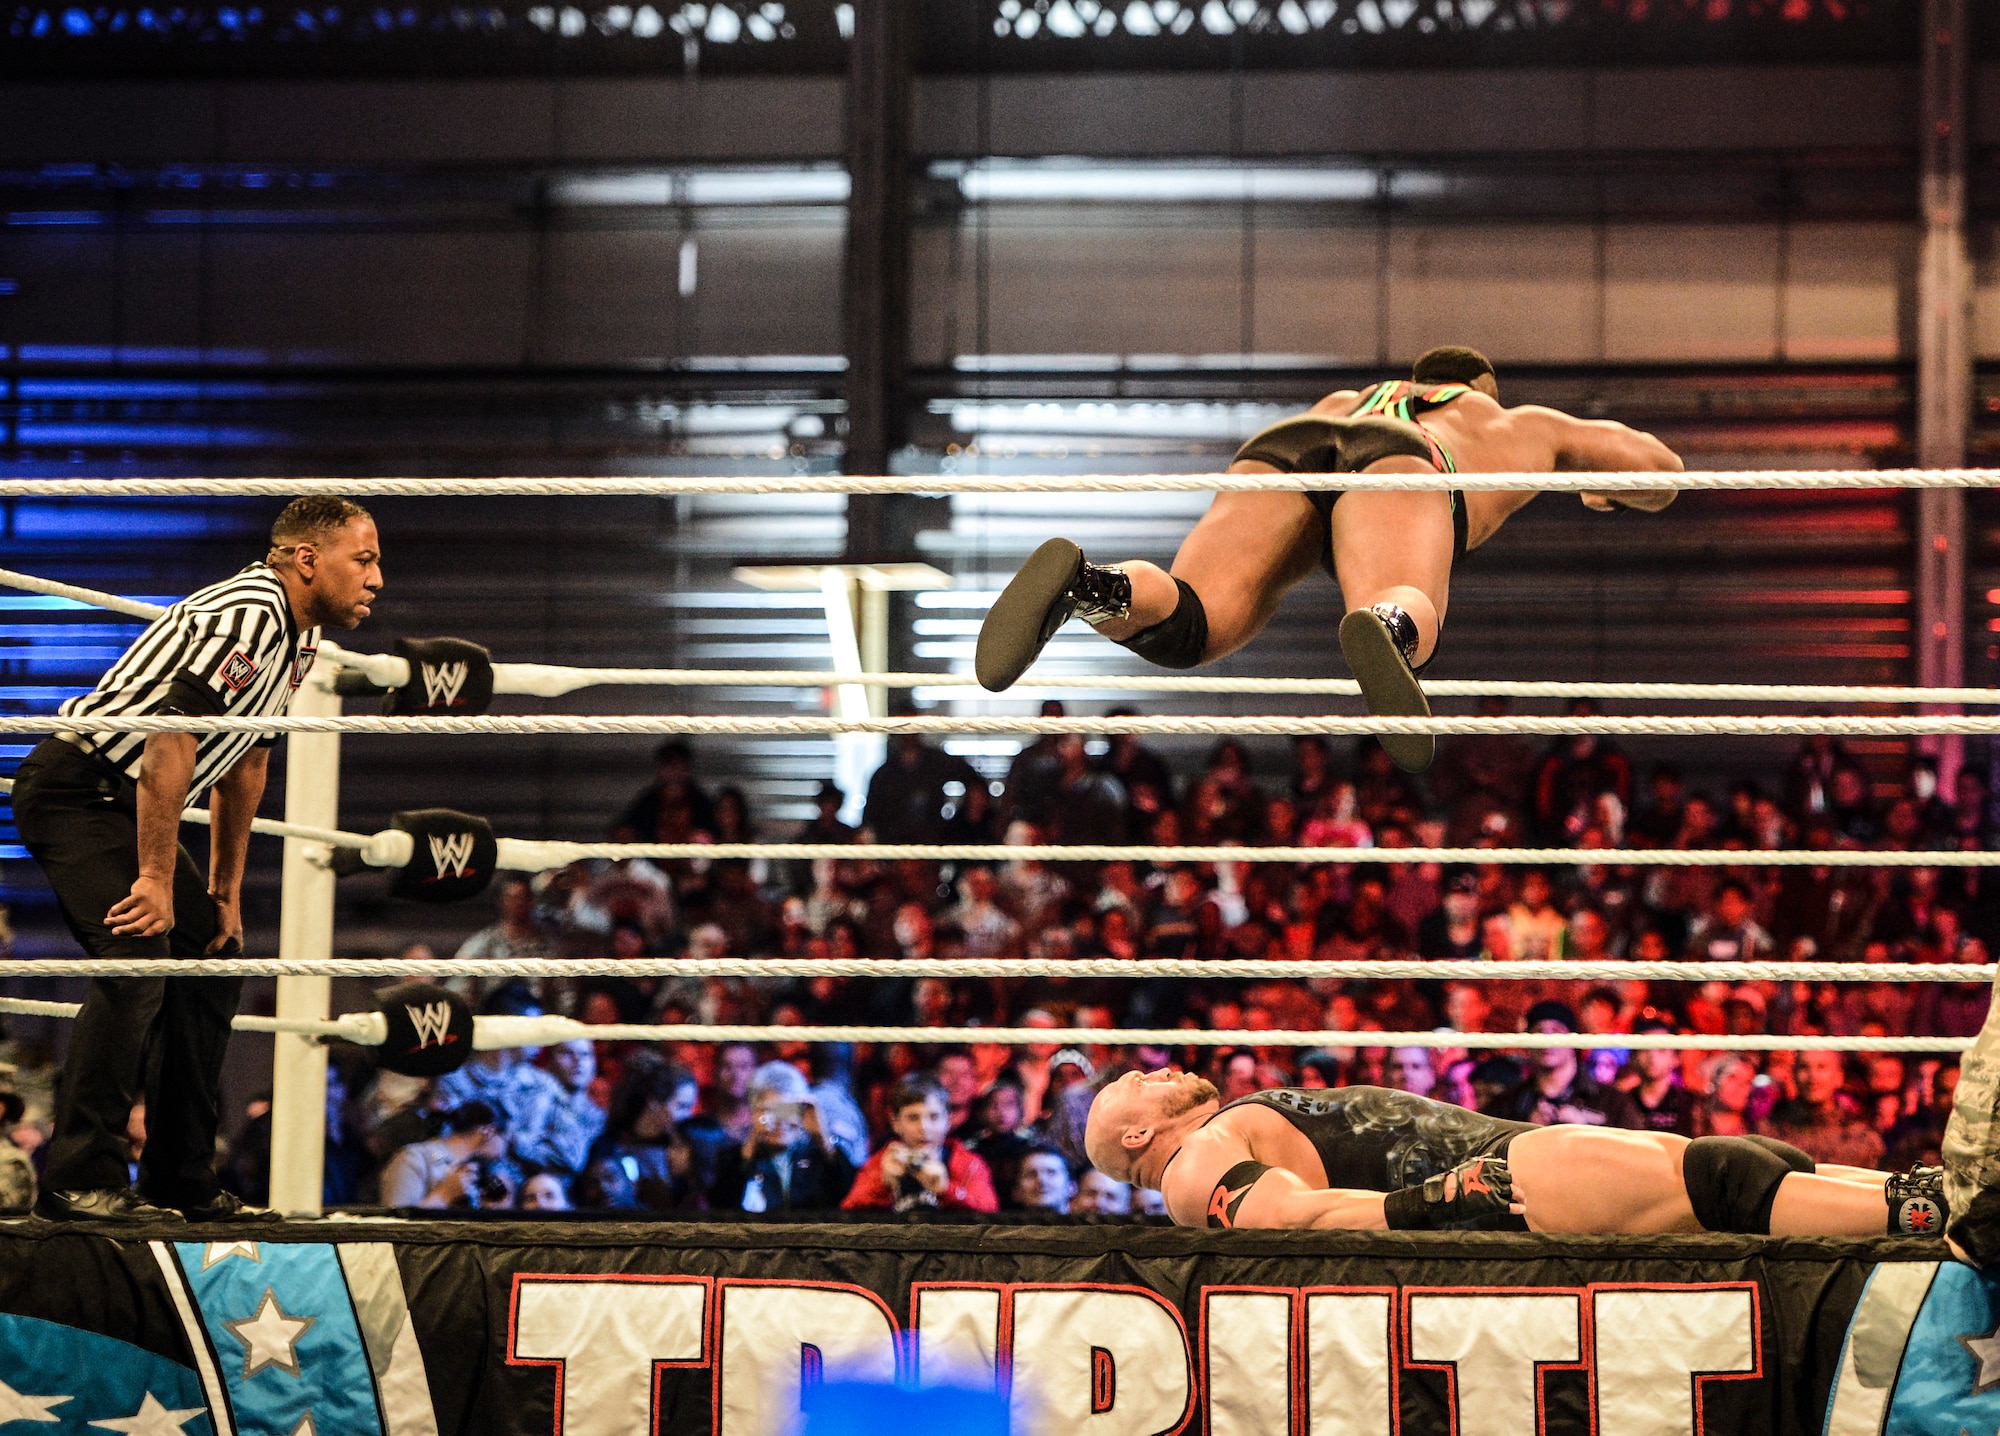 WWE superstar Big E Langston flies high over his opponent Ryback during a wrestling match, Dec. 13, 2013, at Joint Base Lewis-McChord, Wash. The WWE Tribute to the Troops event, which entertained thousands of JBLM service members and family members, featured dozens of WWE superstars and divas and included performances by the rock band Daughtry and comedian Jeff Dunham. (U.S. Air Force photo/Tech. Sgt. Sean Tobin)